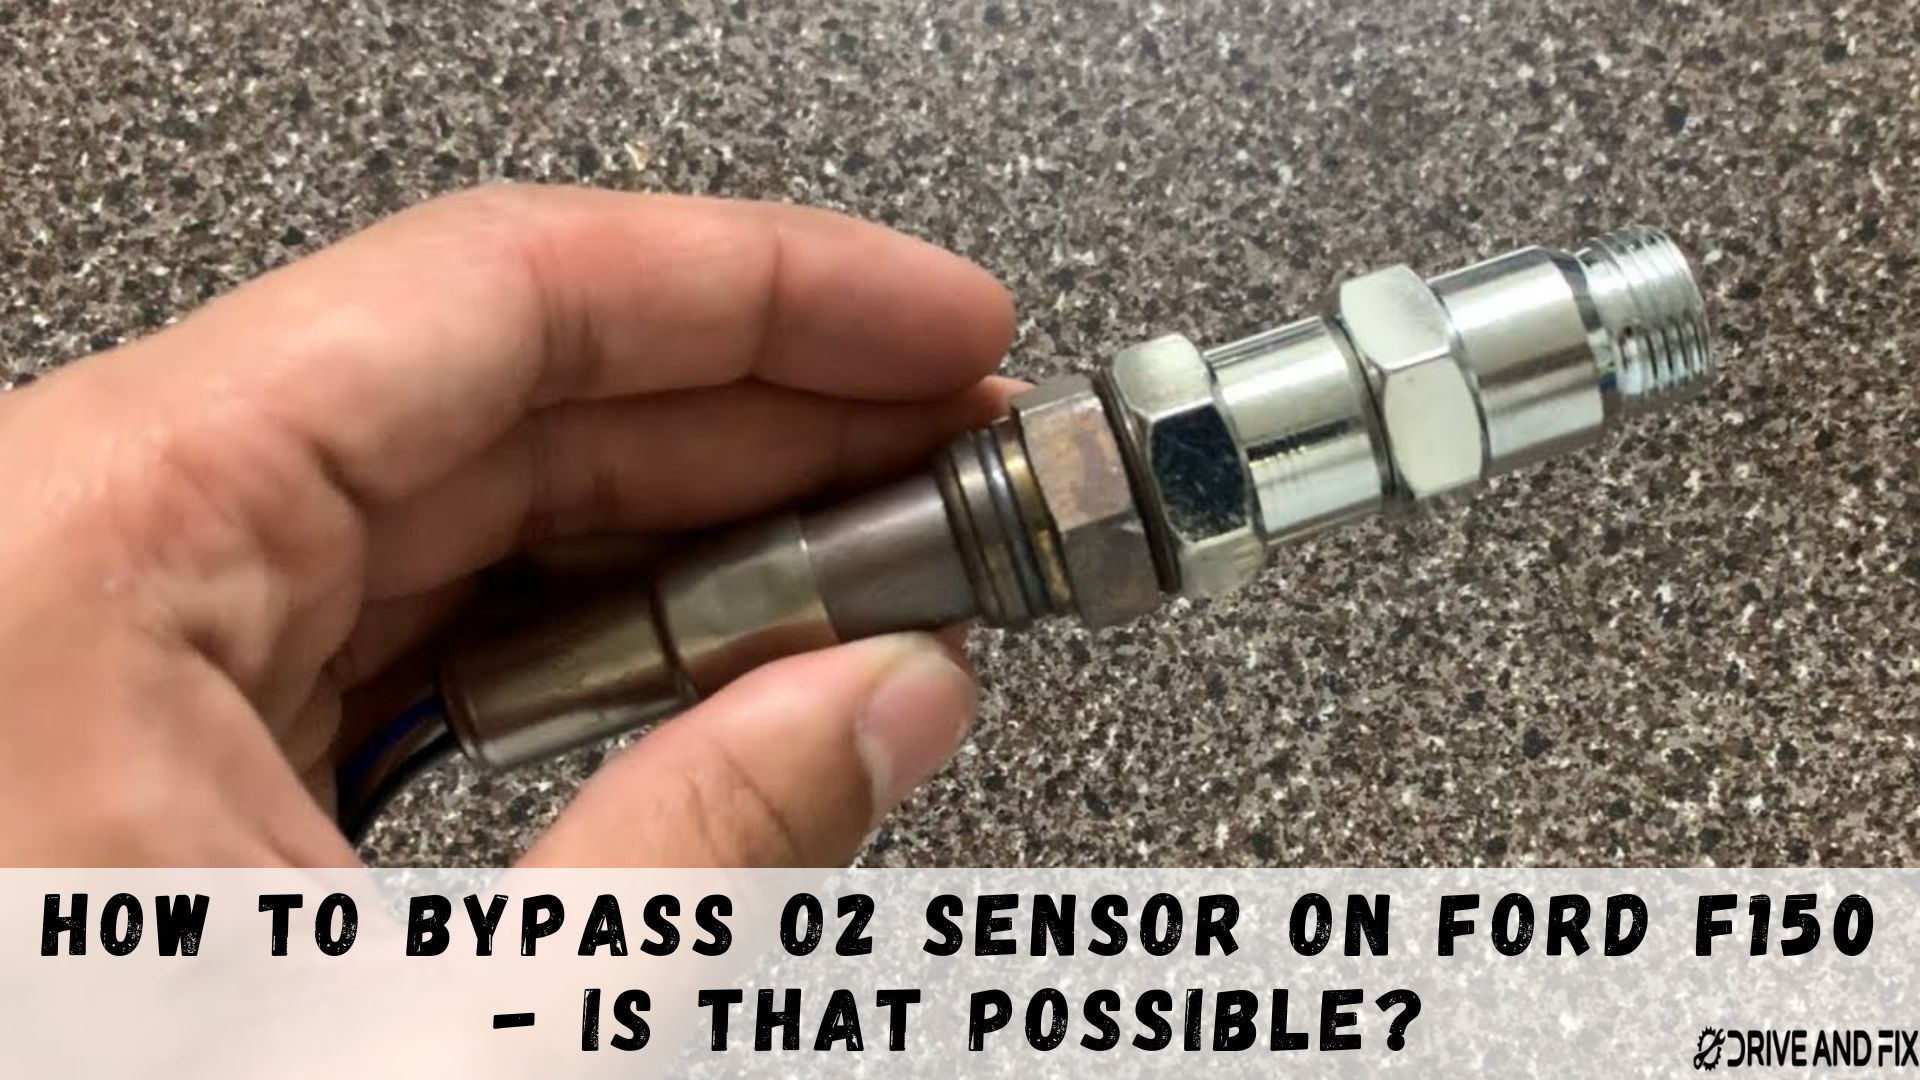 How To Bypass O2 Sensor On Ford F150